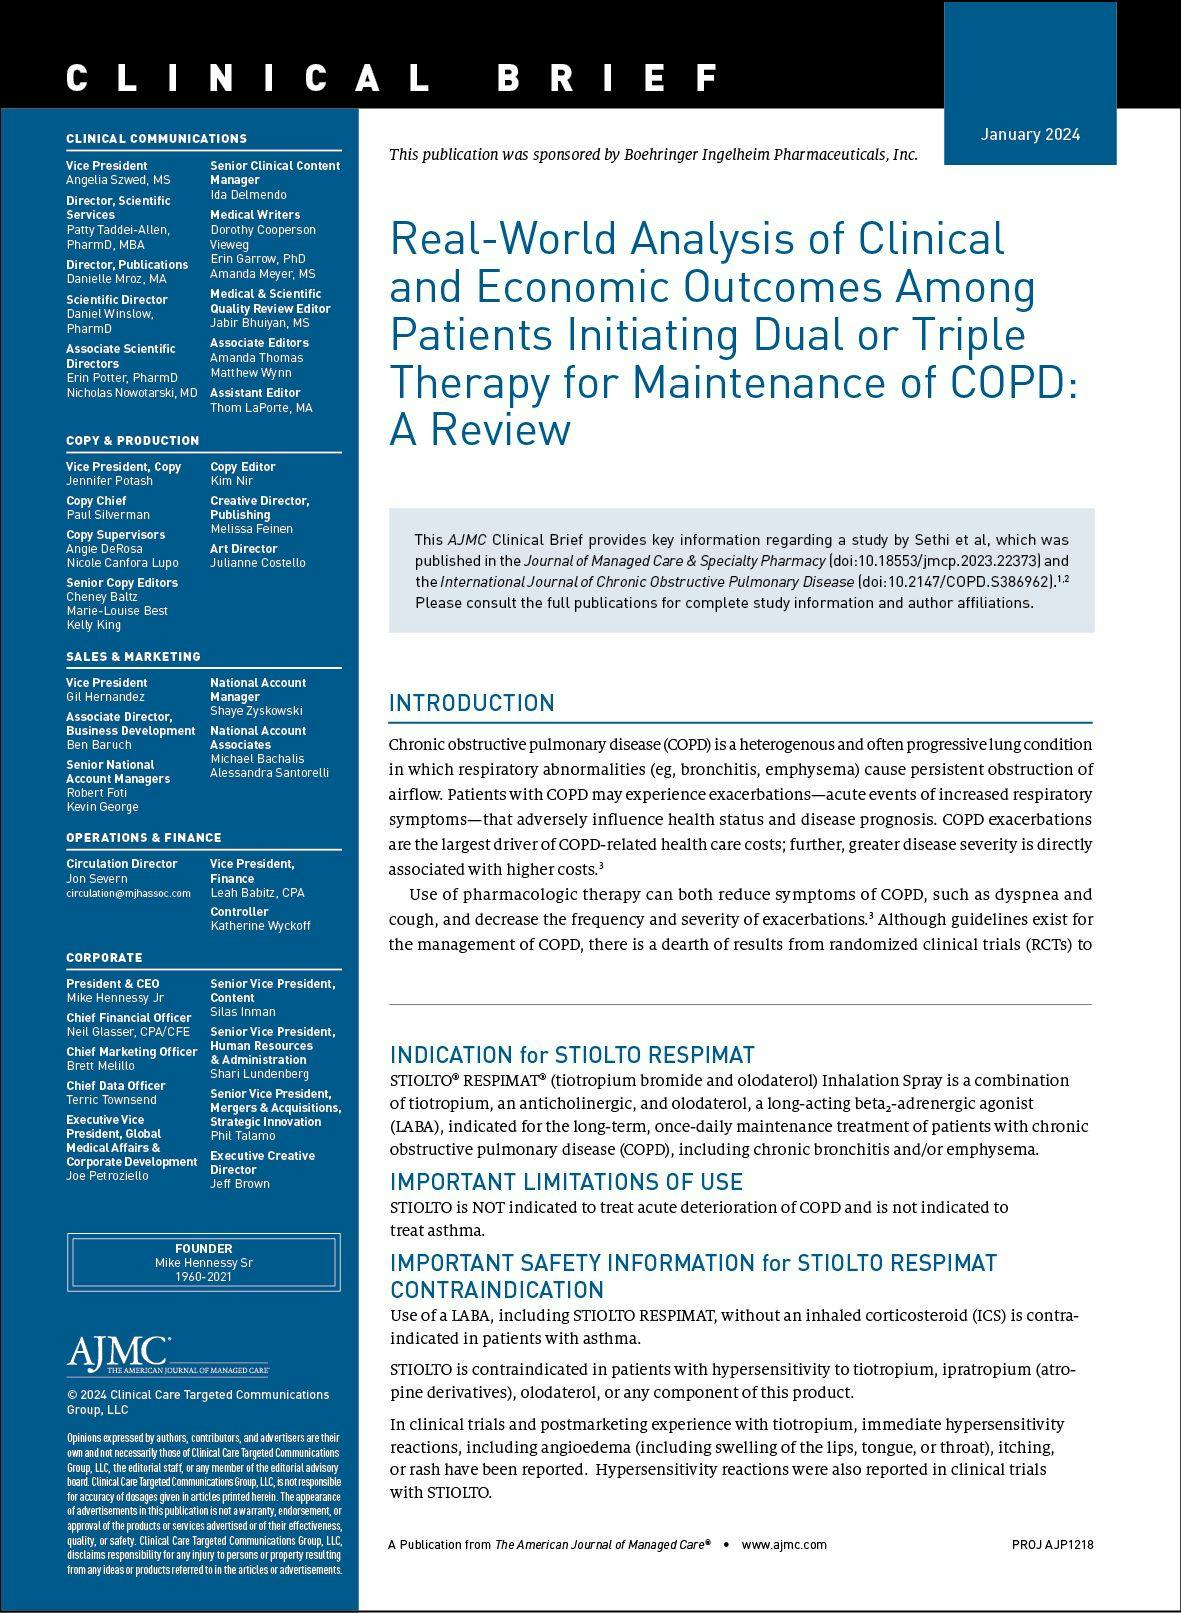 Real-World Analysis of Clinical and Economic Outcomes Among Patients Initiating Dual or Triple Therapy for Maintenance of COPD: A Review